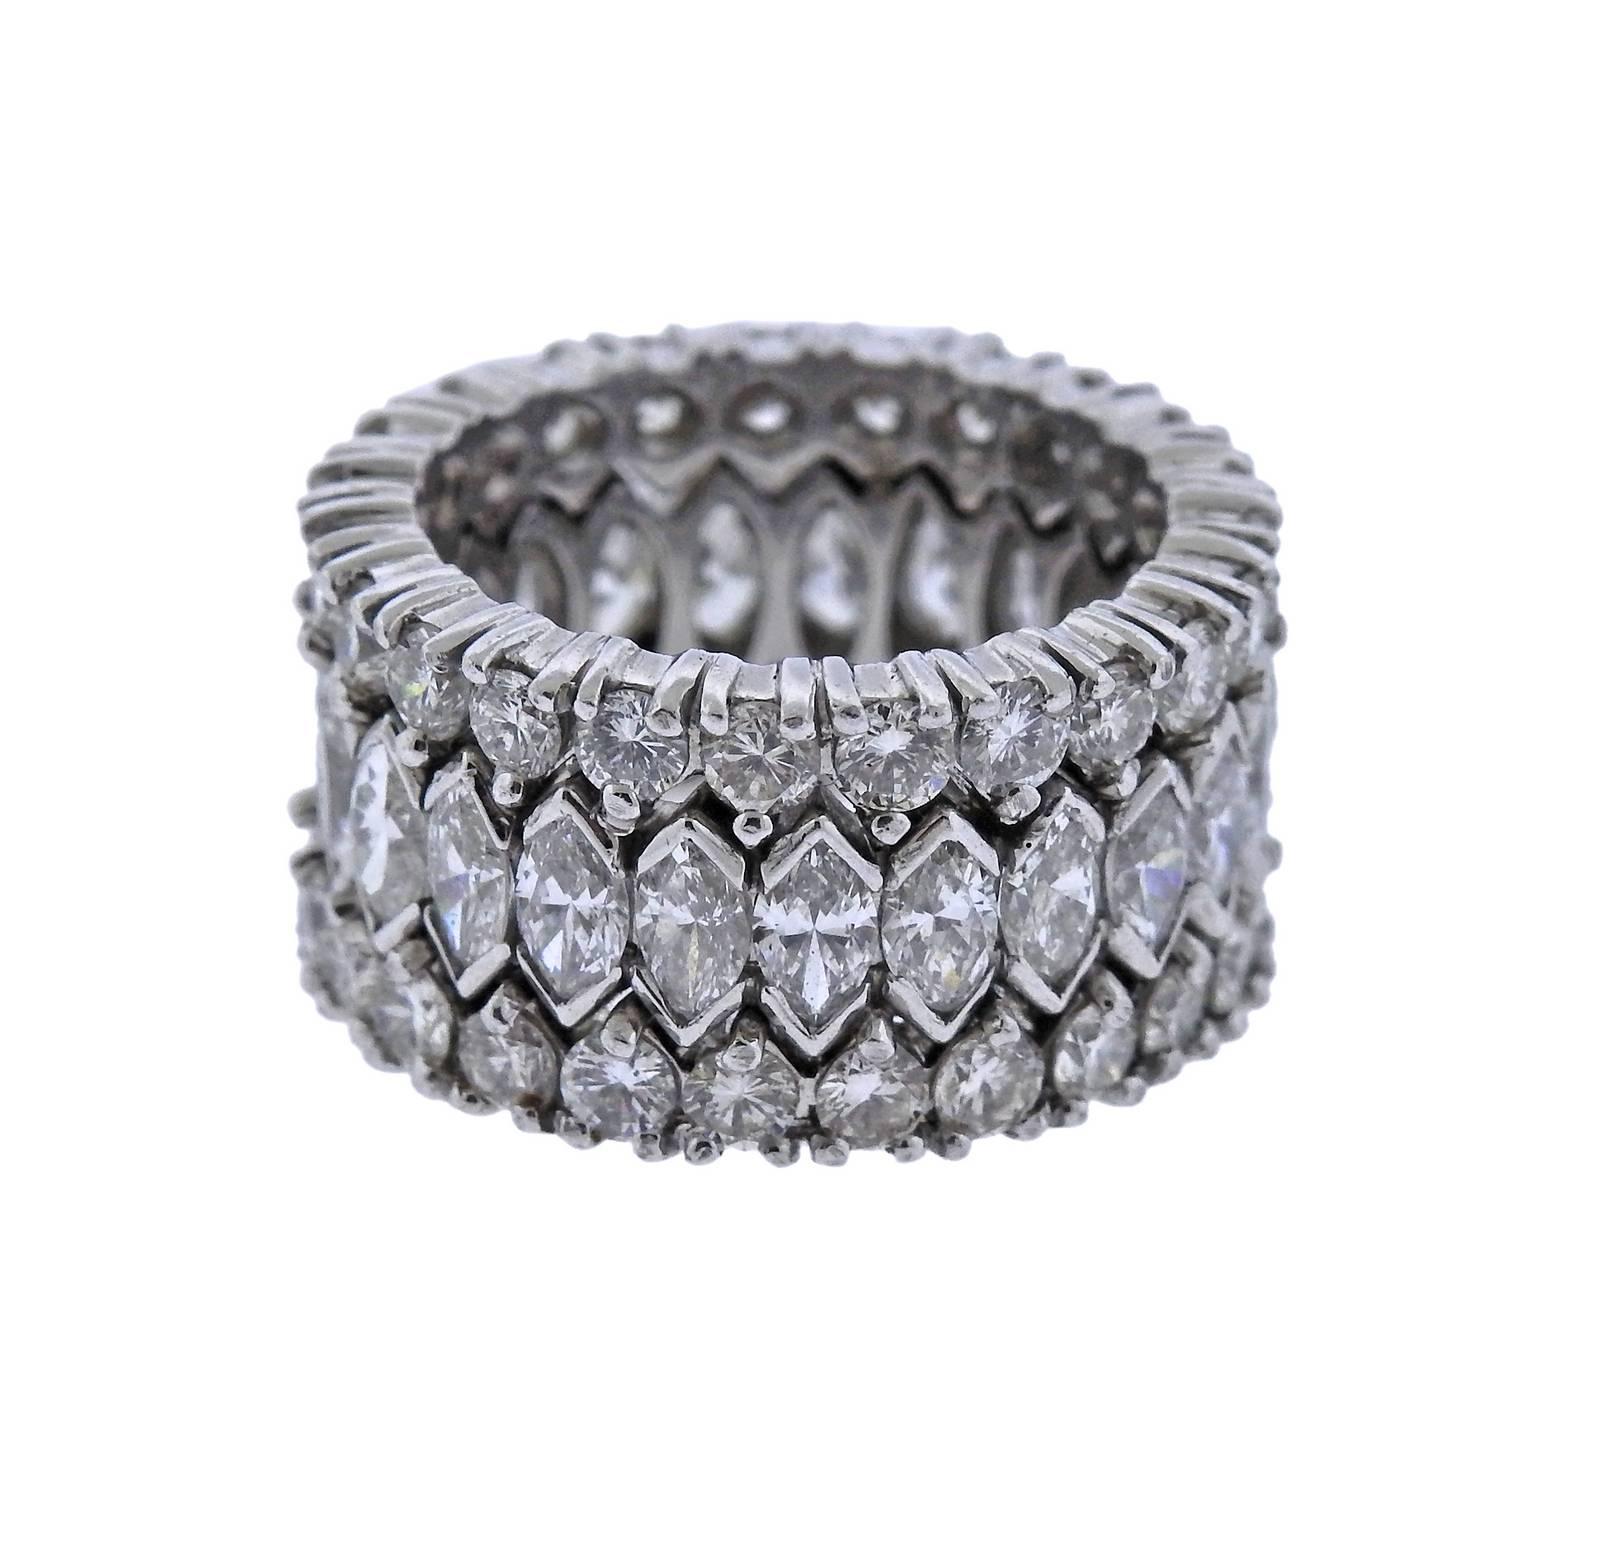 A platinum eternity band ring featuring approximately 3.50ctw of round brilliant cut diamonds and approximately 3.26ctw of marquise diamonds, all G color and VS-SI2 clarity. Ring size - 6 1/4, ring is 11.9mm wide and weighs 19.6 grams. 